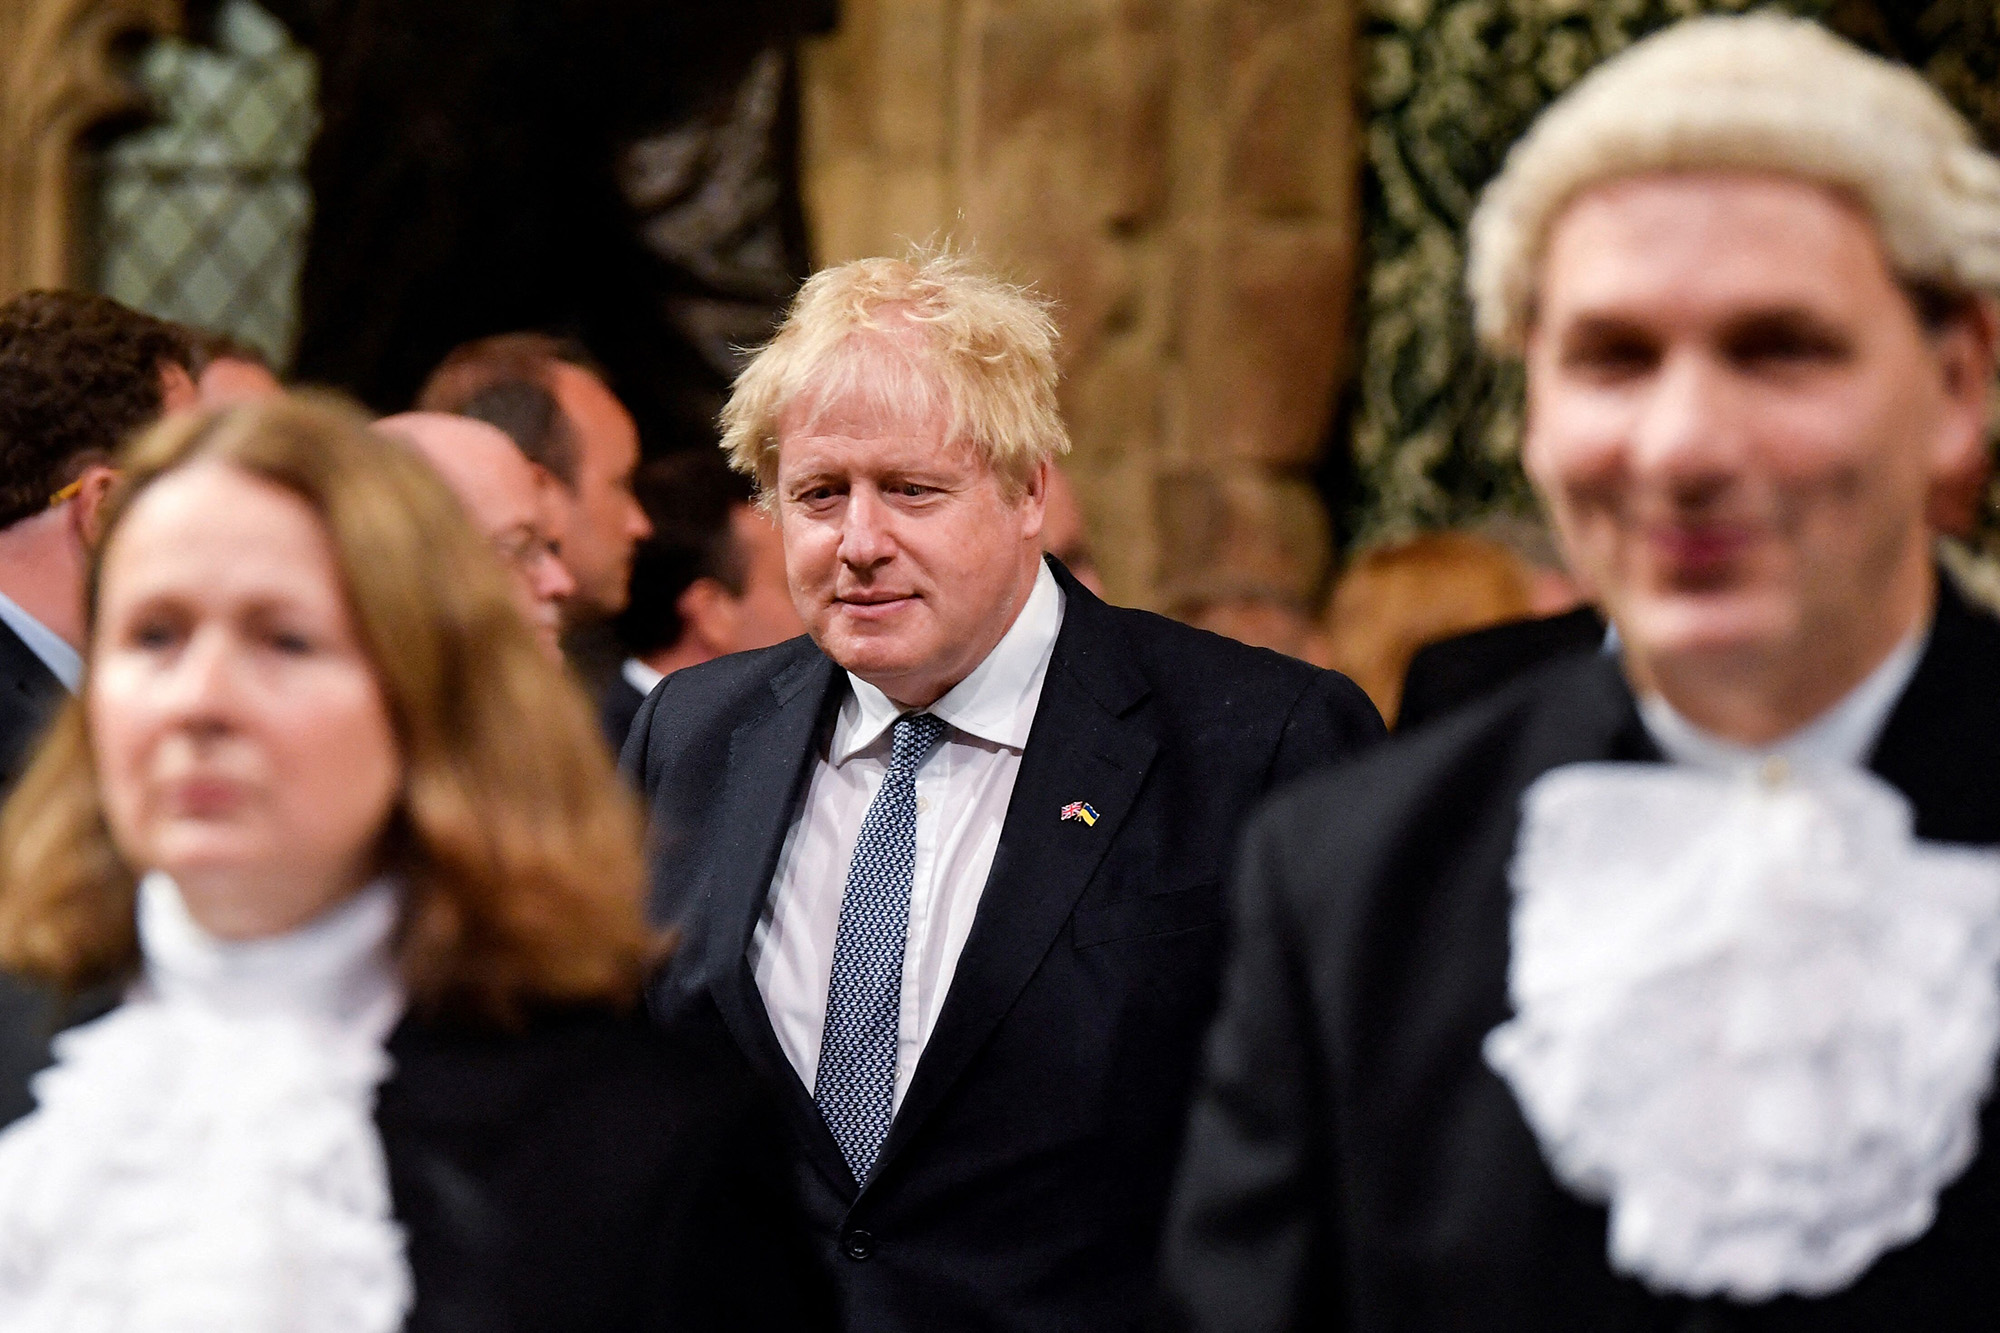 Britain's Prime Minister Boris Johnson processes through the House of Commons Members' Lobby during the State Opening of Parliament, at the Houses of Parliament, in London, England, on May 10.